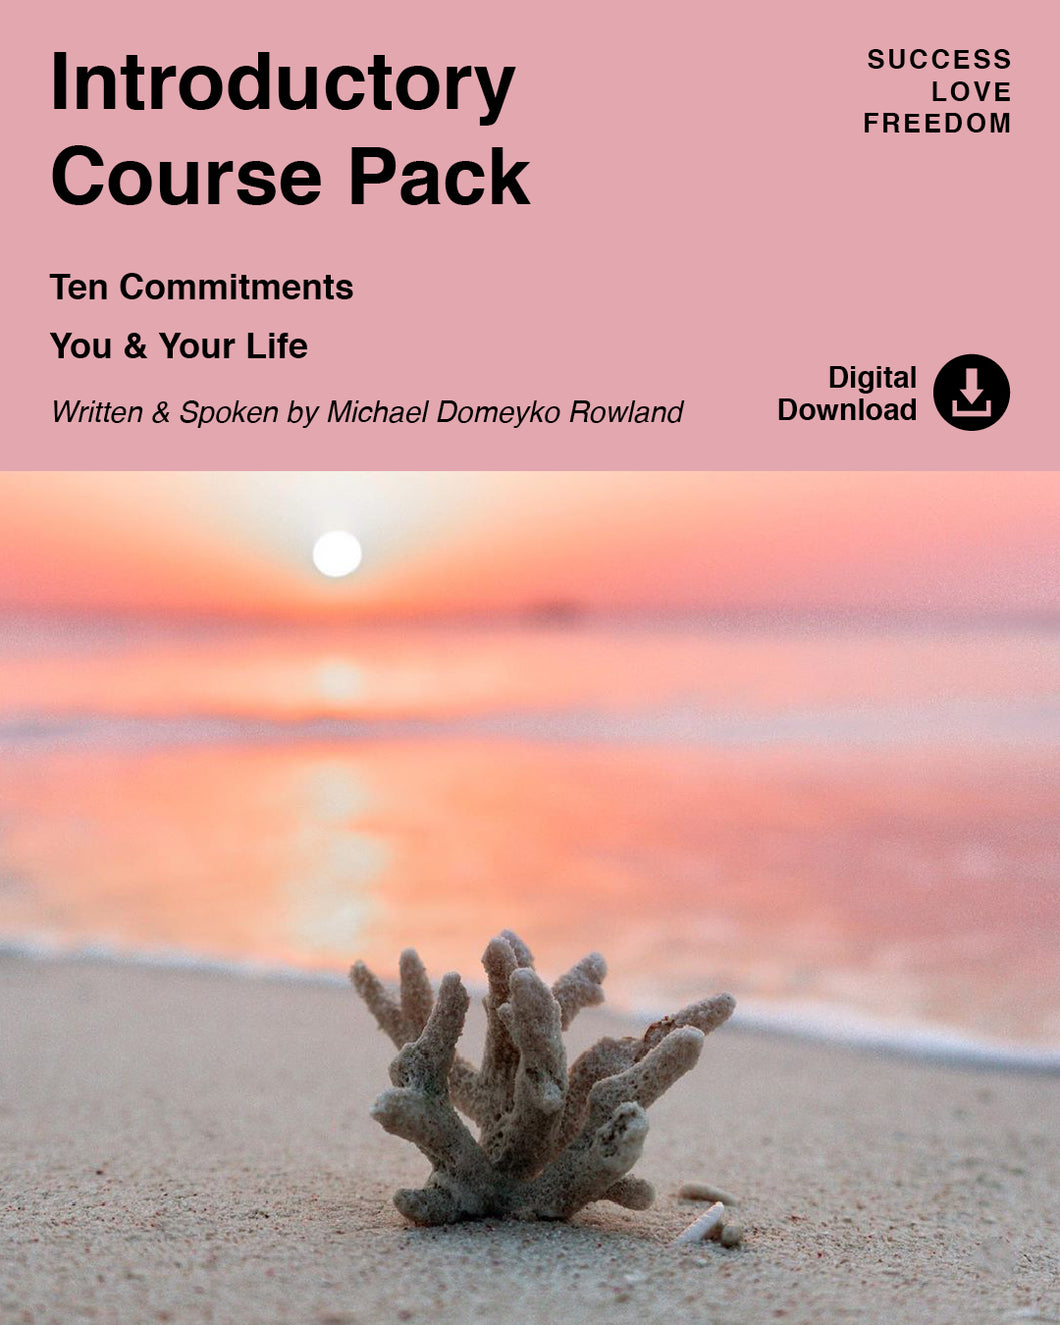 Introductory Course Pack - Success Love Freedom